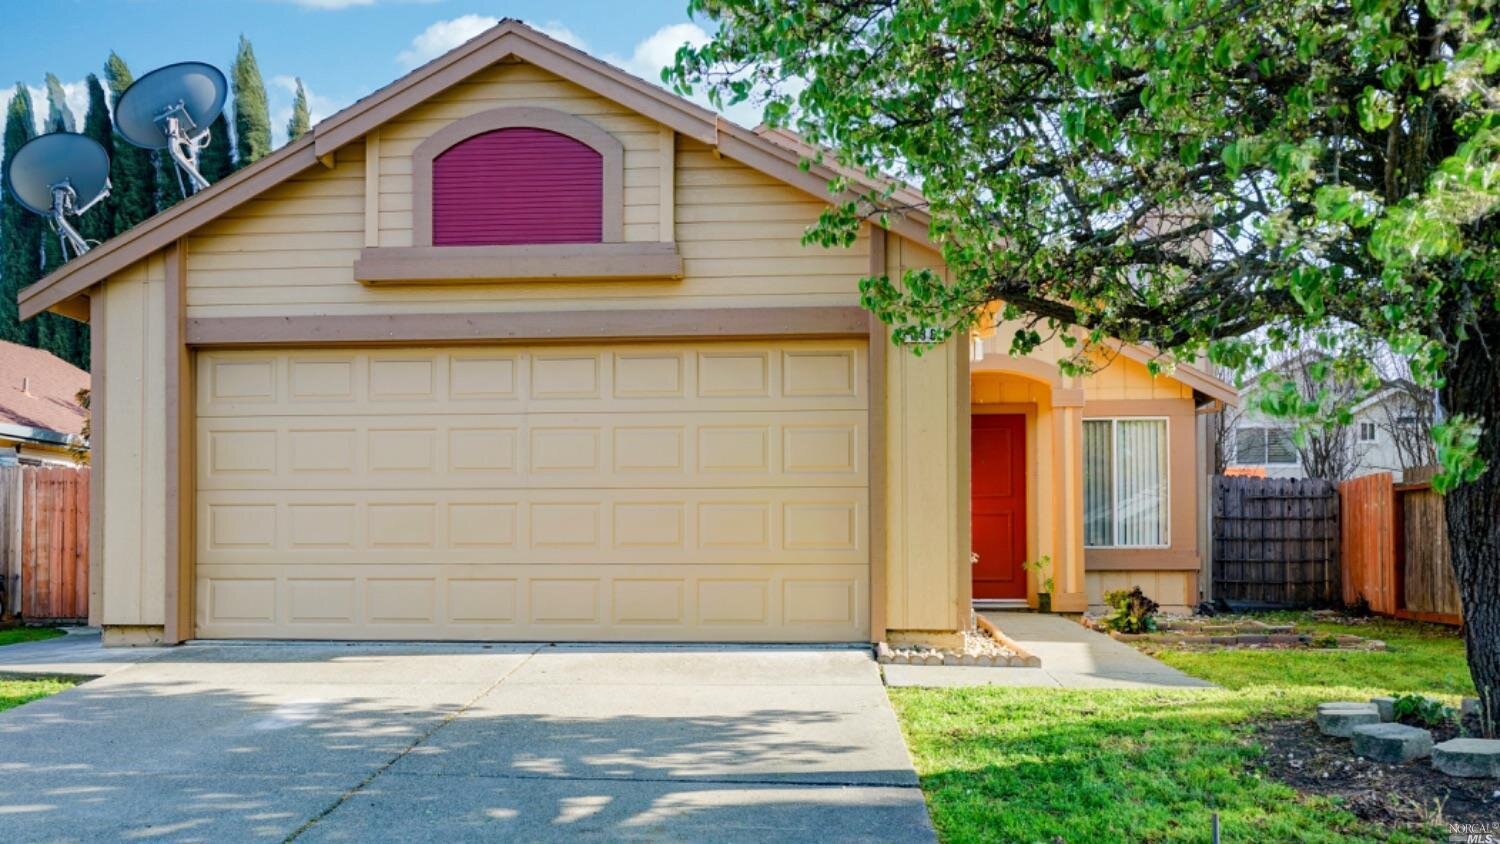 836 Turquoise St | Vacaville CA | 4-10-20